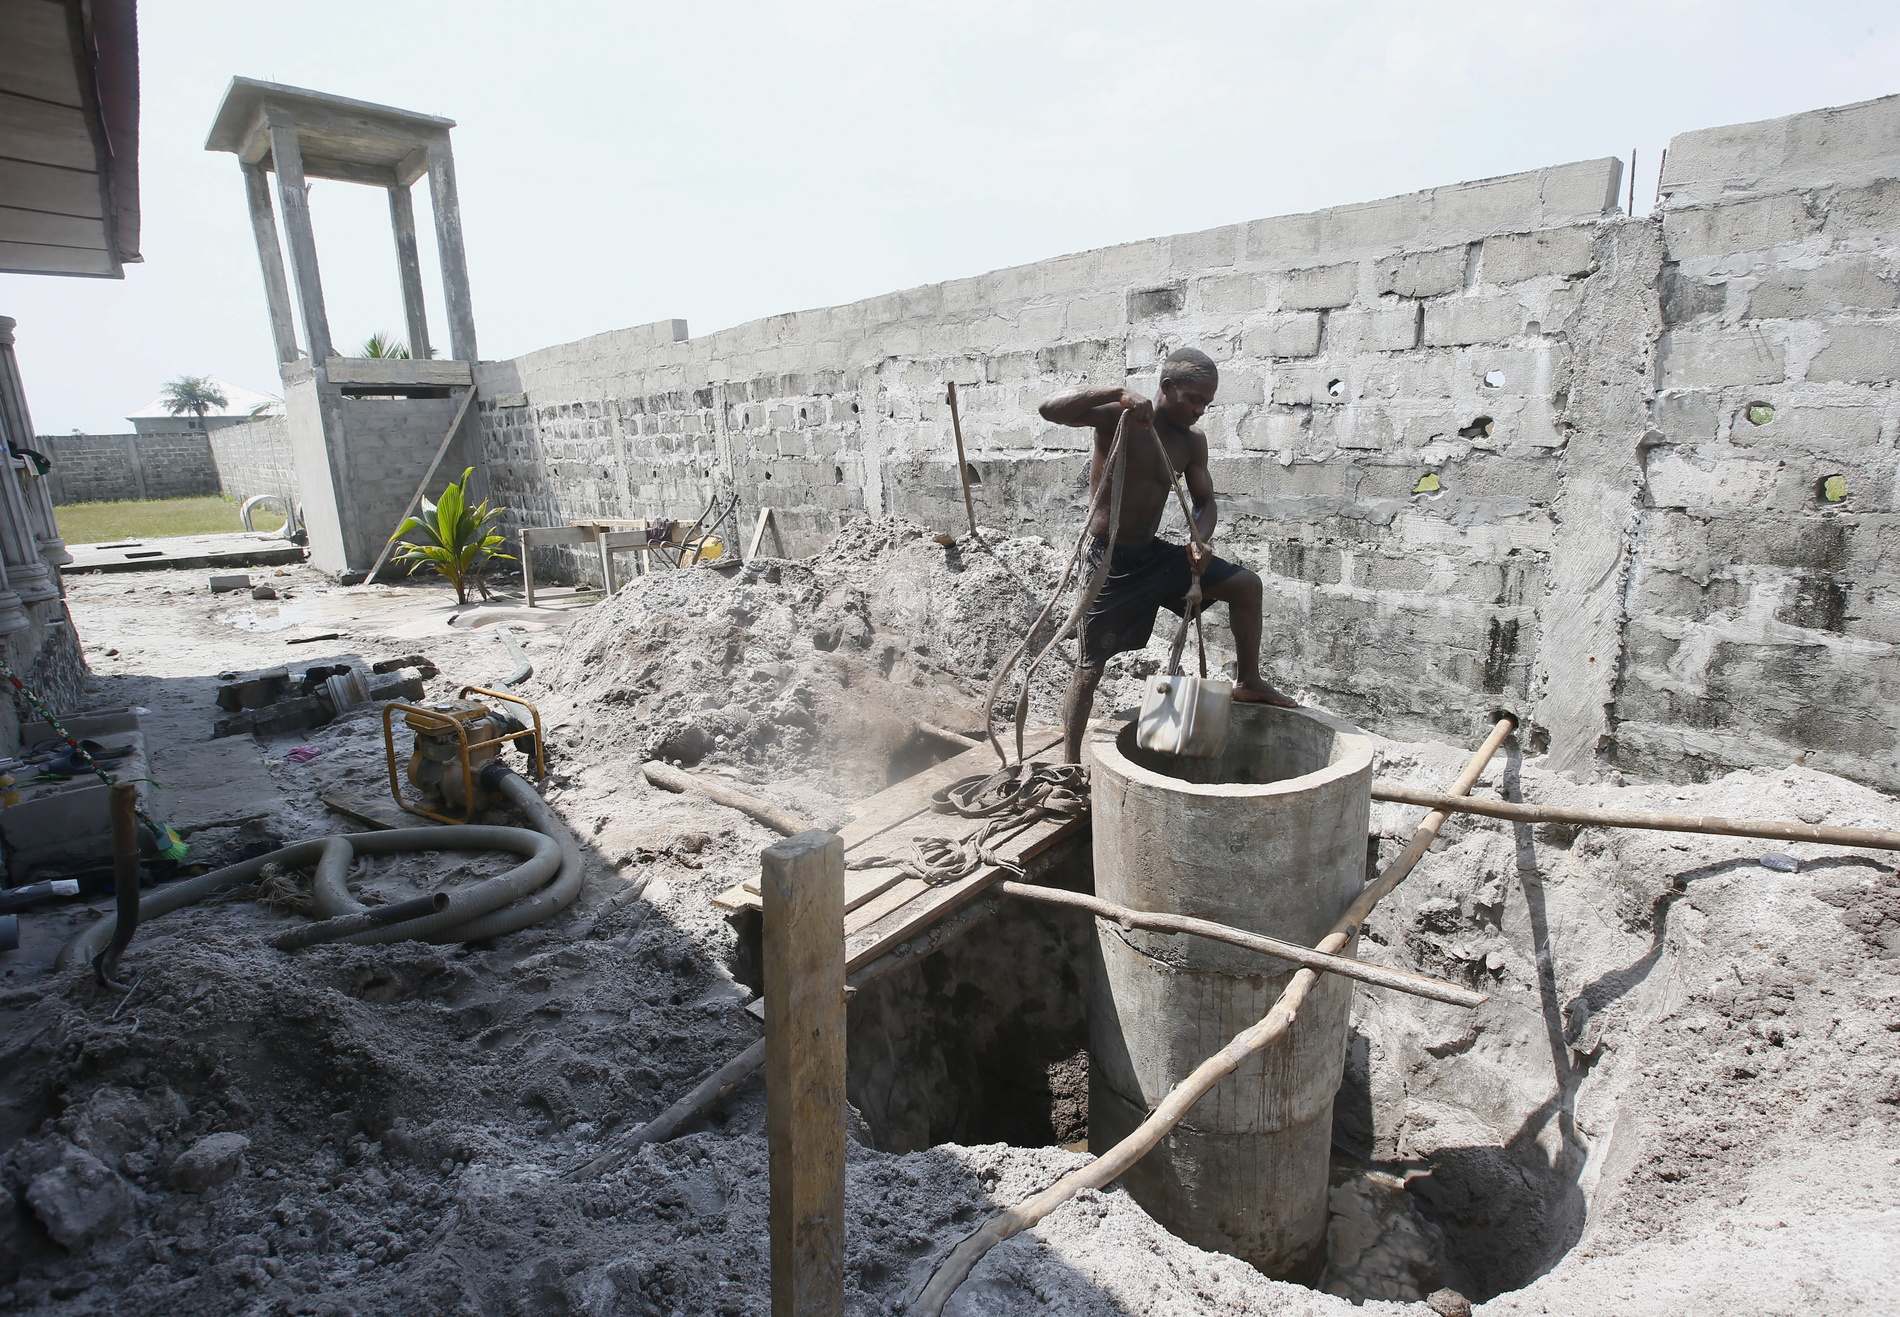 A man digging at a well construction site.